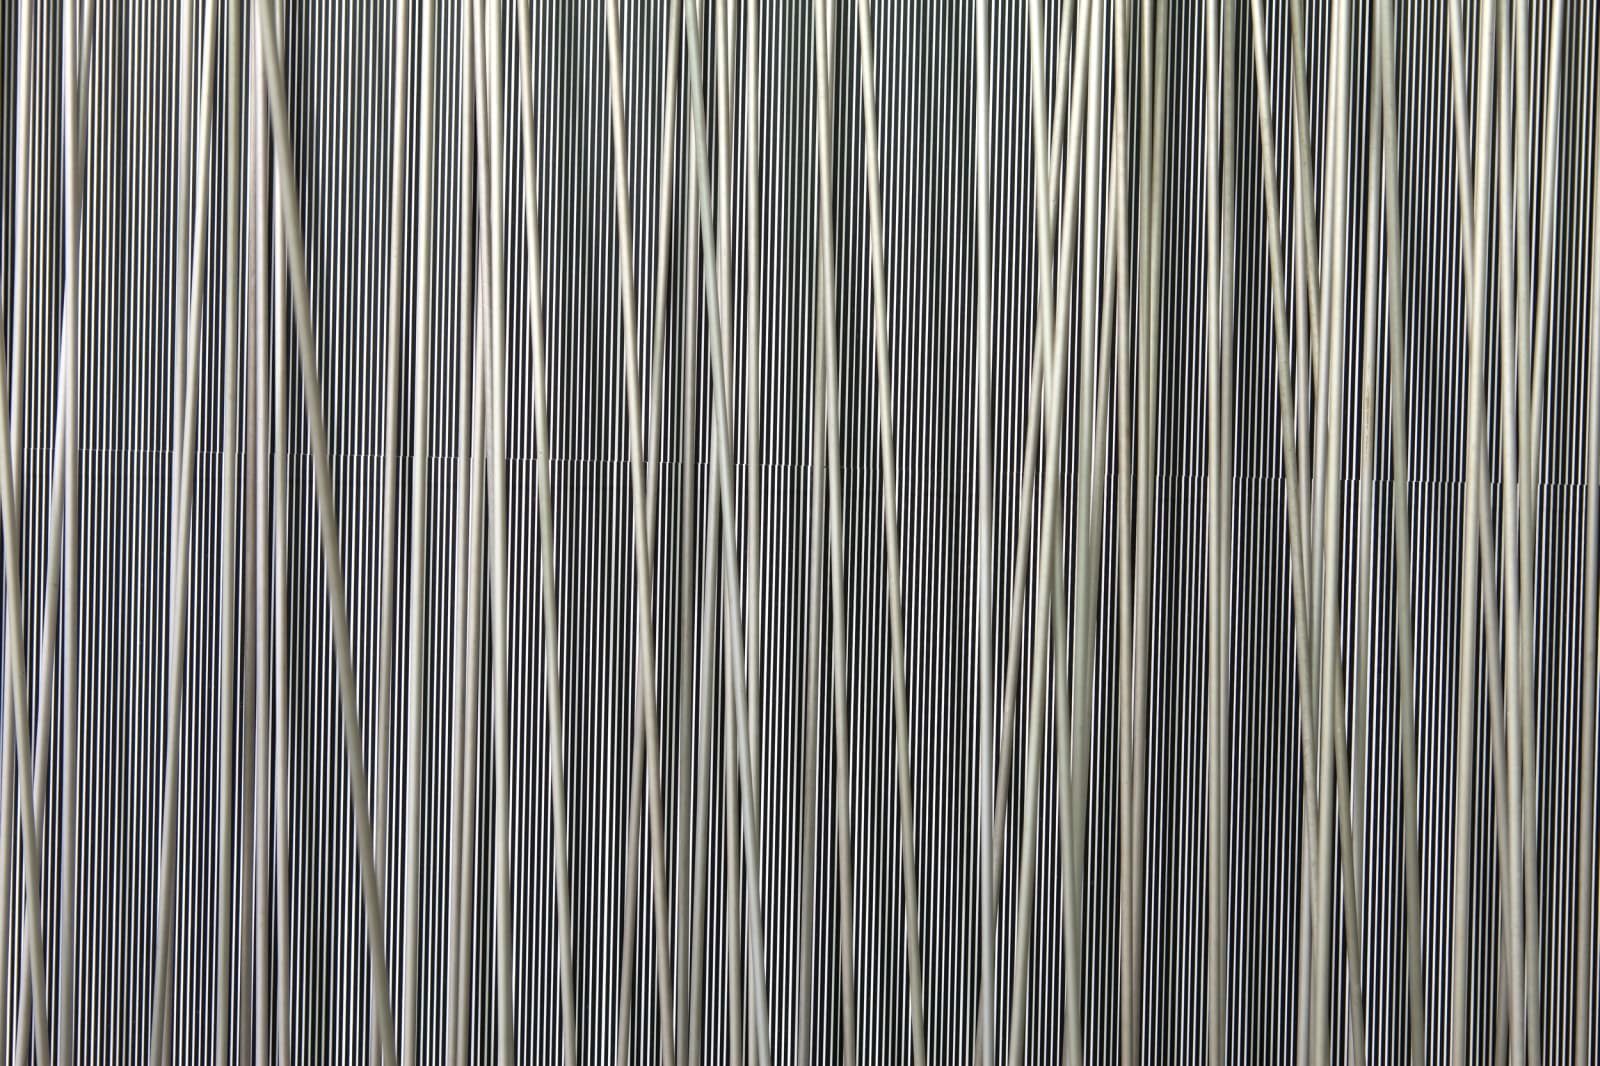 Murale Panoramico Vibrante Sonoro, 1968, Metal, wood, paint, lined paper, 230 x 480 x 380 cm